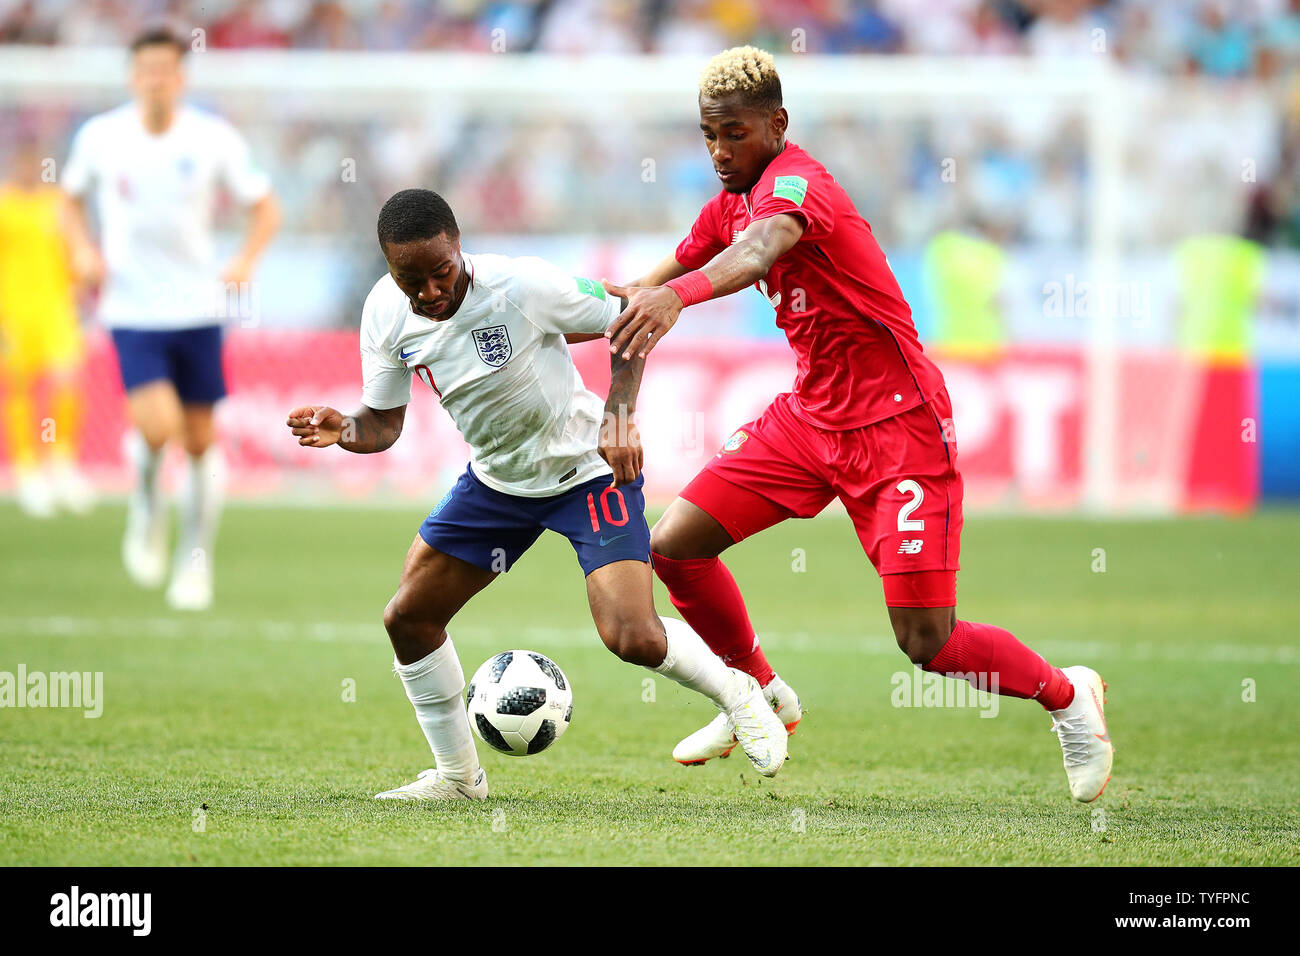 Raheem Sterling (L) of England competes for the ball with Michael Murillo of Panama during the 2018 FIFA World Cup Group G match at the Nizhny Novgorod Stadium in Nizhny Novgorod, Russia on June 24, 2018. Photo by Chris Brunskill/UPI Stock Photo